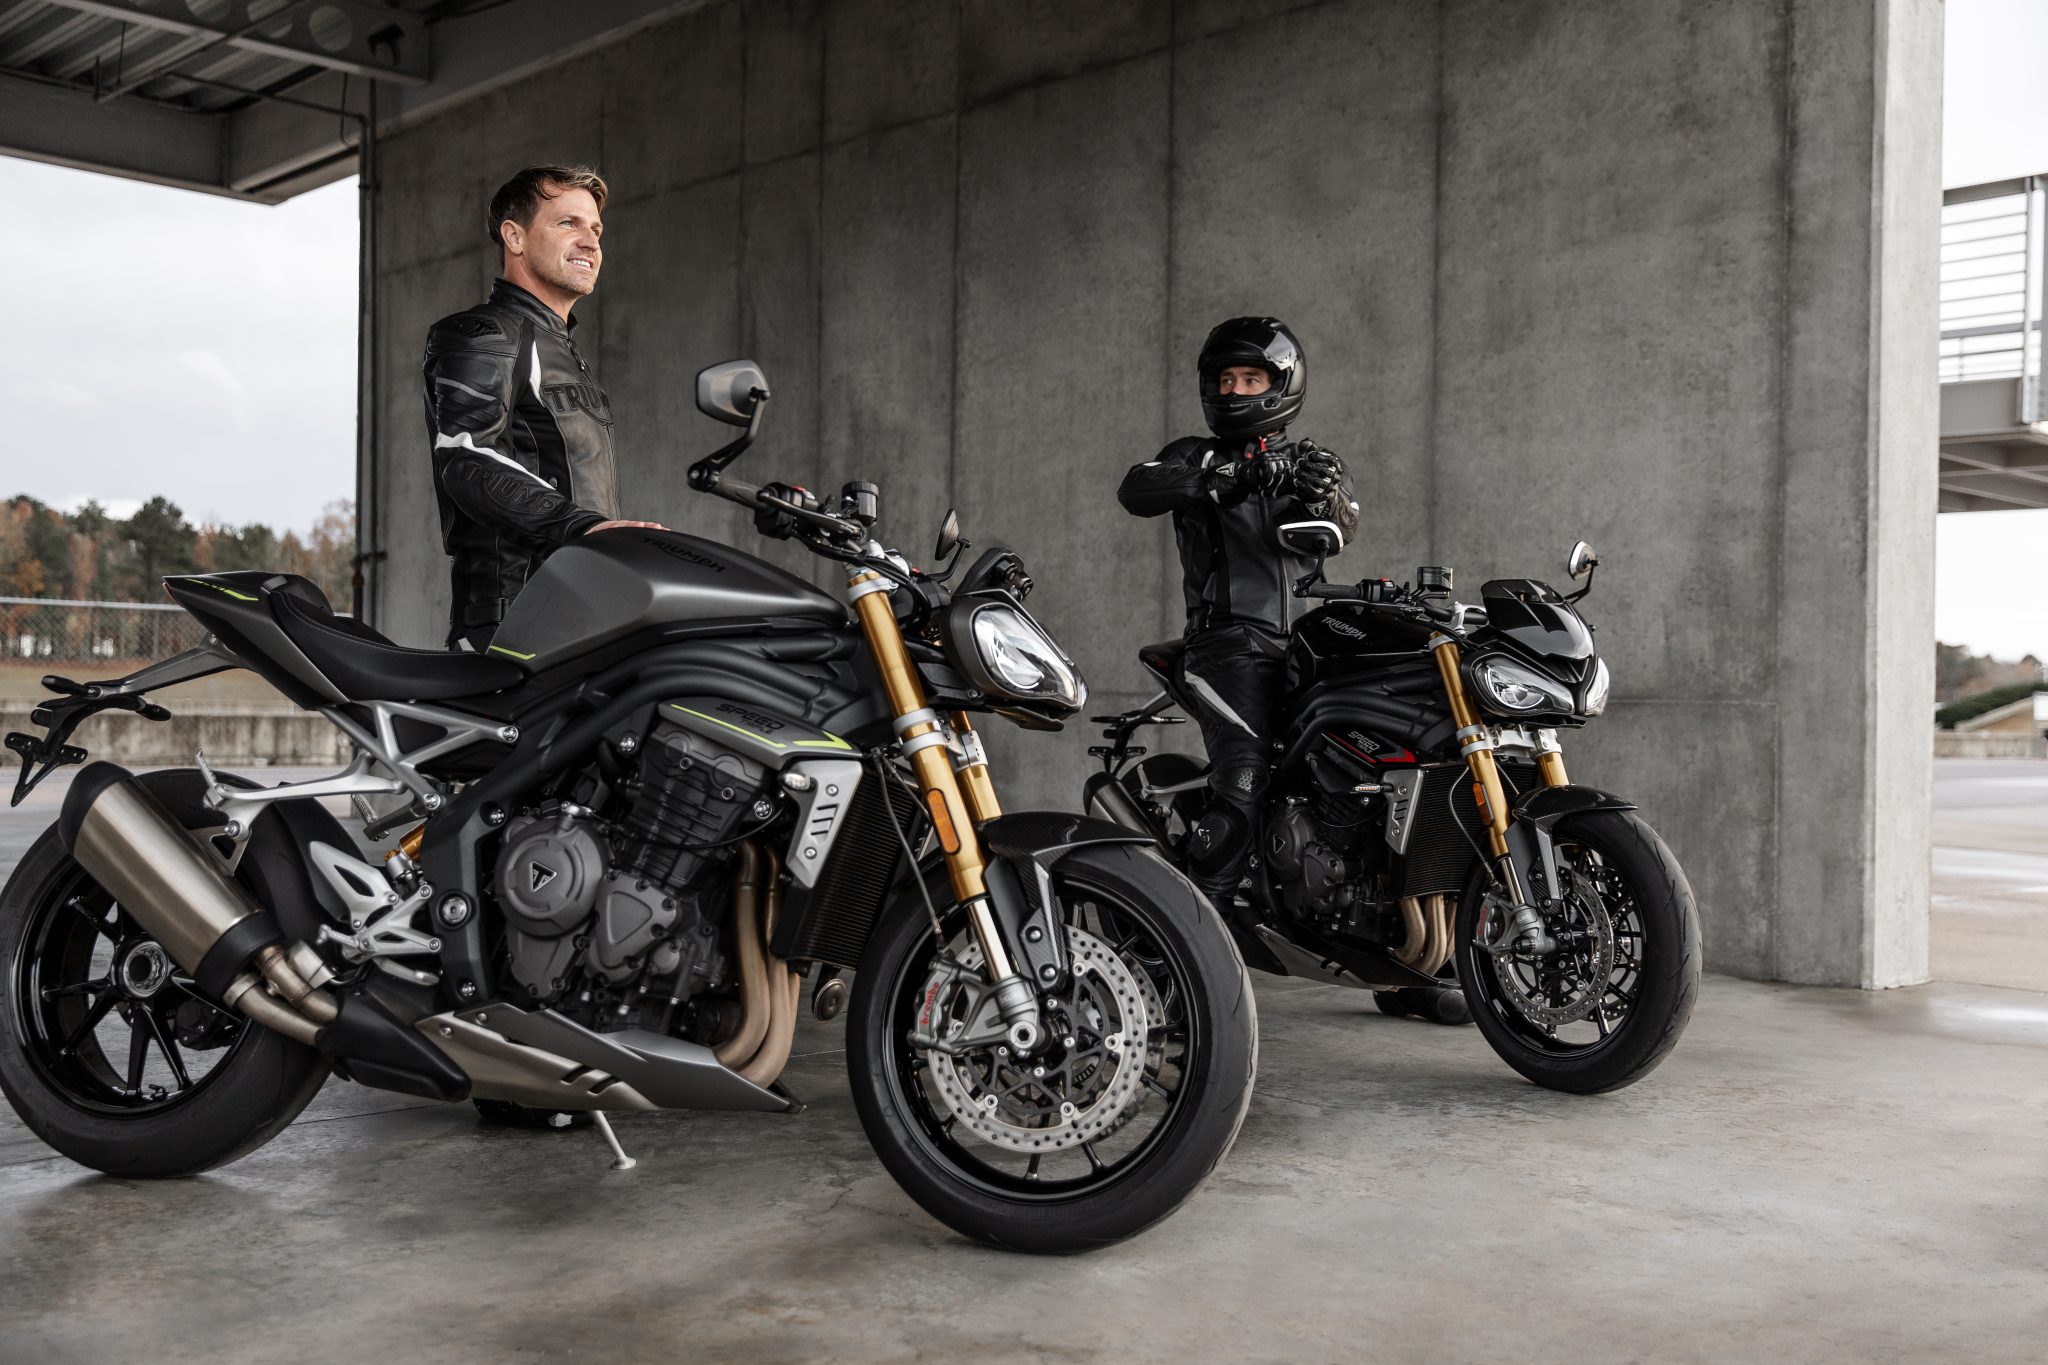 Triumph go bigger and better with New Speed Triple RS – Moto Rider World